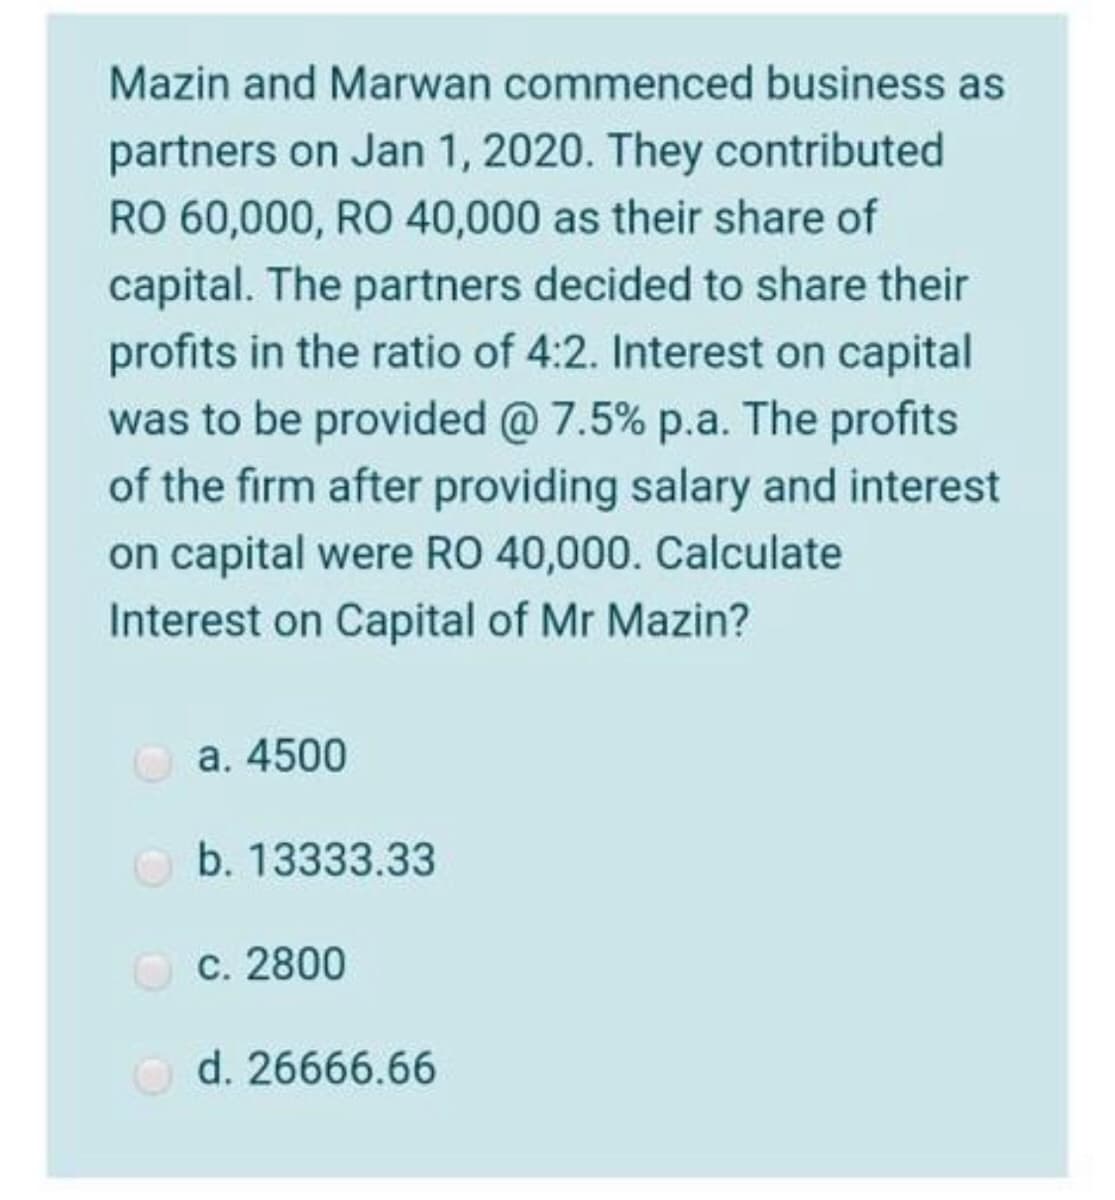 Mazin and Marwan commenced business as
partners on Jan 1, 2020. They contributed
RO 60,000, RO 40,000 as their share of
capital. The partners decided to share their
profits in the ratio of 4:2. Interest on capital
was to be provided @ 7.5% p.a. The profits
of the firm after providing salary and interest
on capital were RO 40,000. Calculate
Interest on Capital of Mr Mazin?
Ⓒa. 4500
b. 13333.33
OC. 2800
c.
Ⓒd. 26666.66